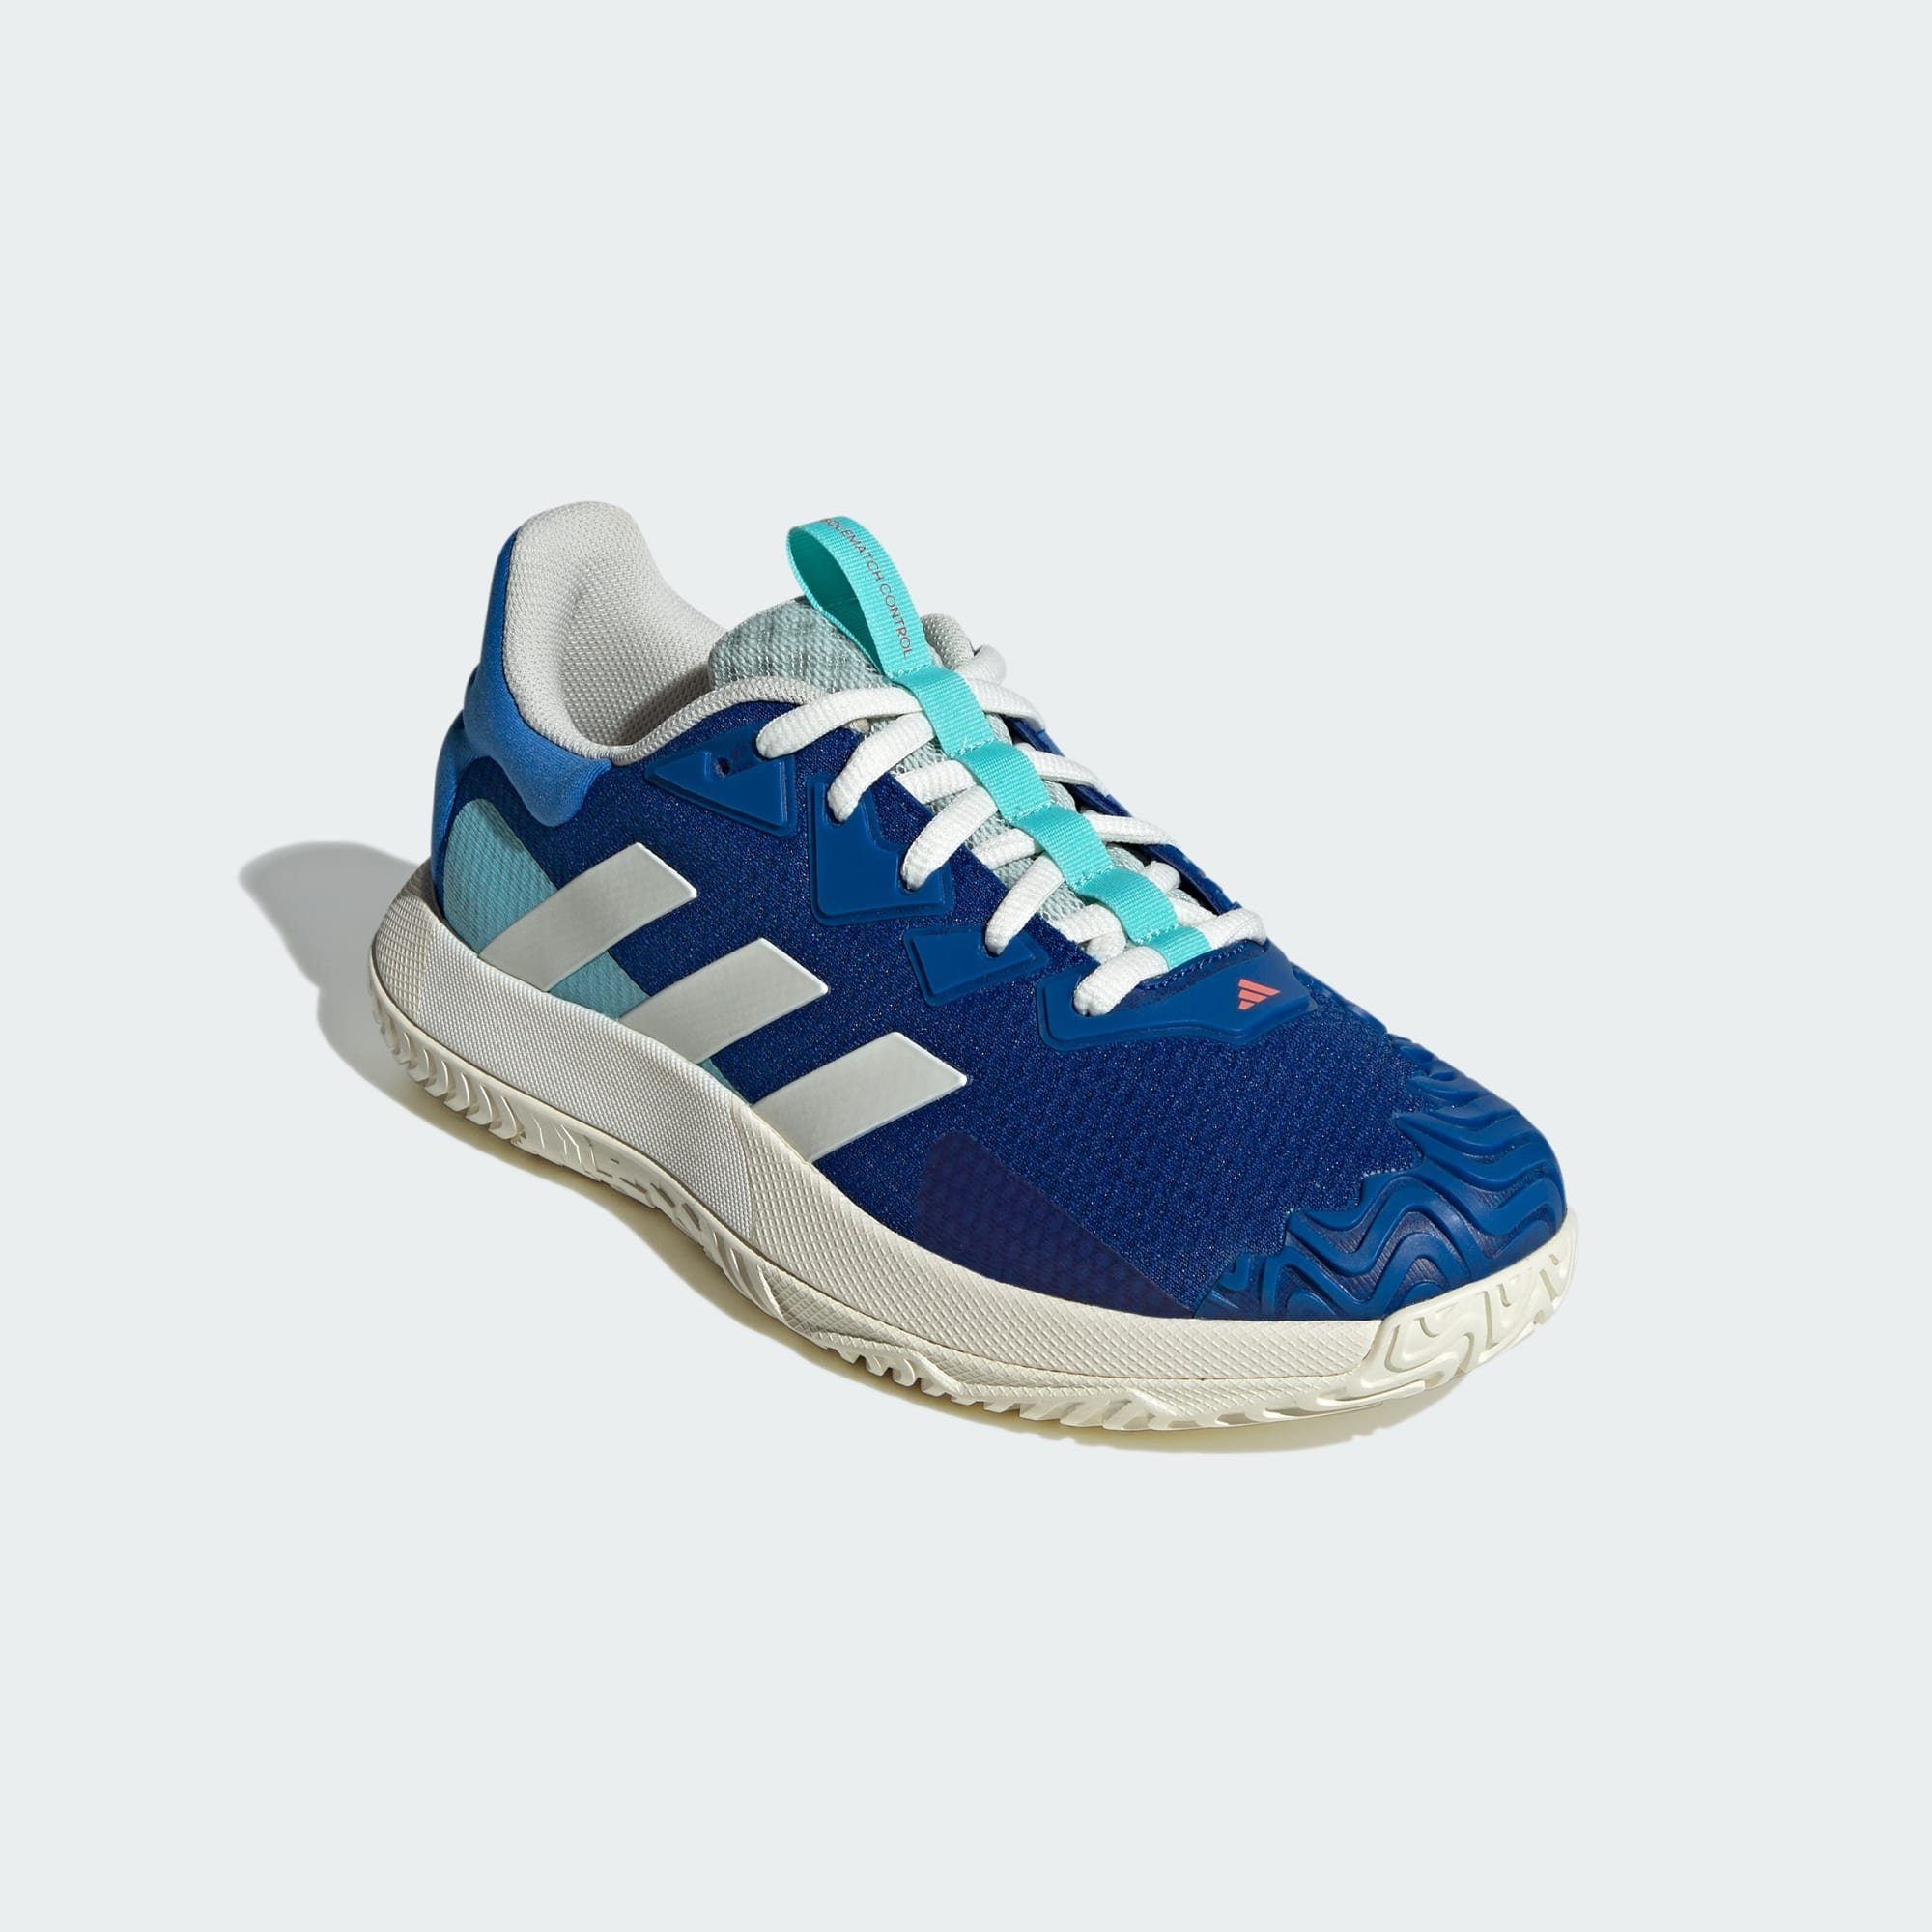 adidas Performance SOLEMATCH CONTROL TENNISSCHUH Indoorschuh Royal Blue / Off White / Bright Royal